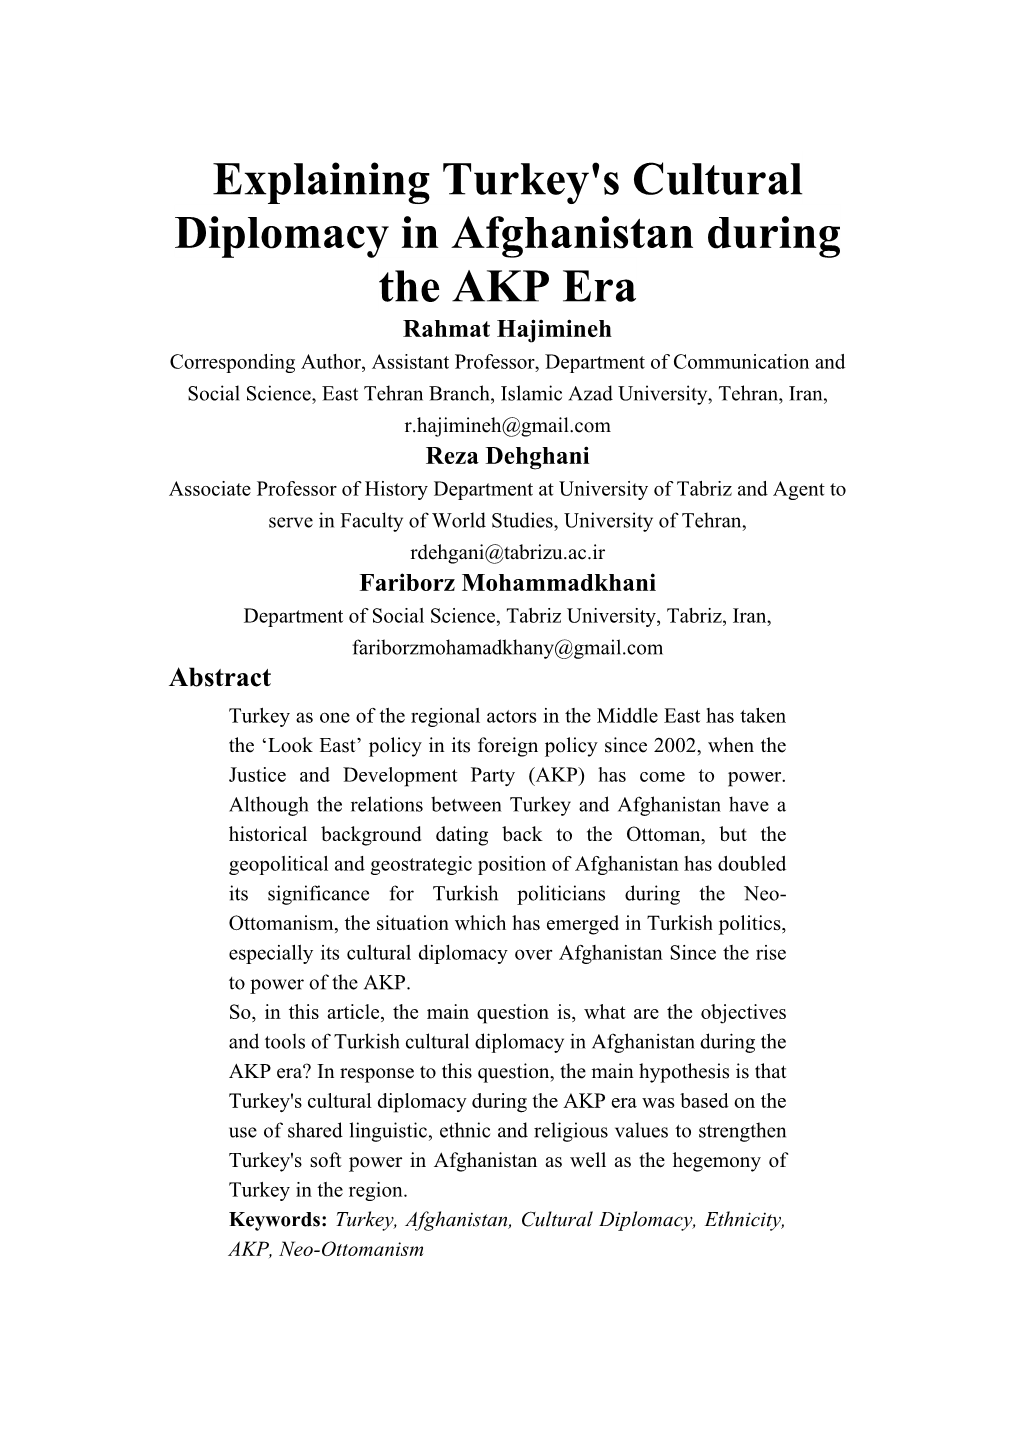 Turkey's Cultural Diplomacy in Afghanistan During the AKP